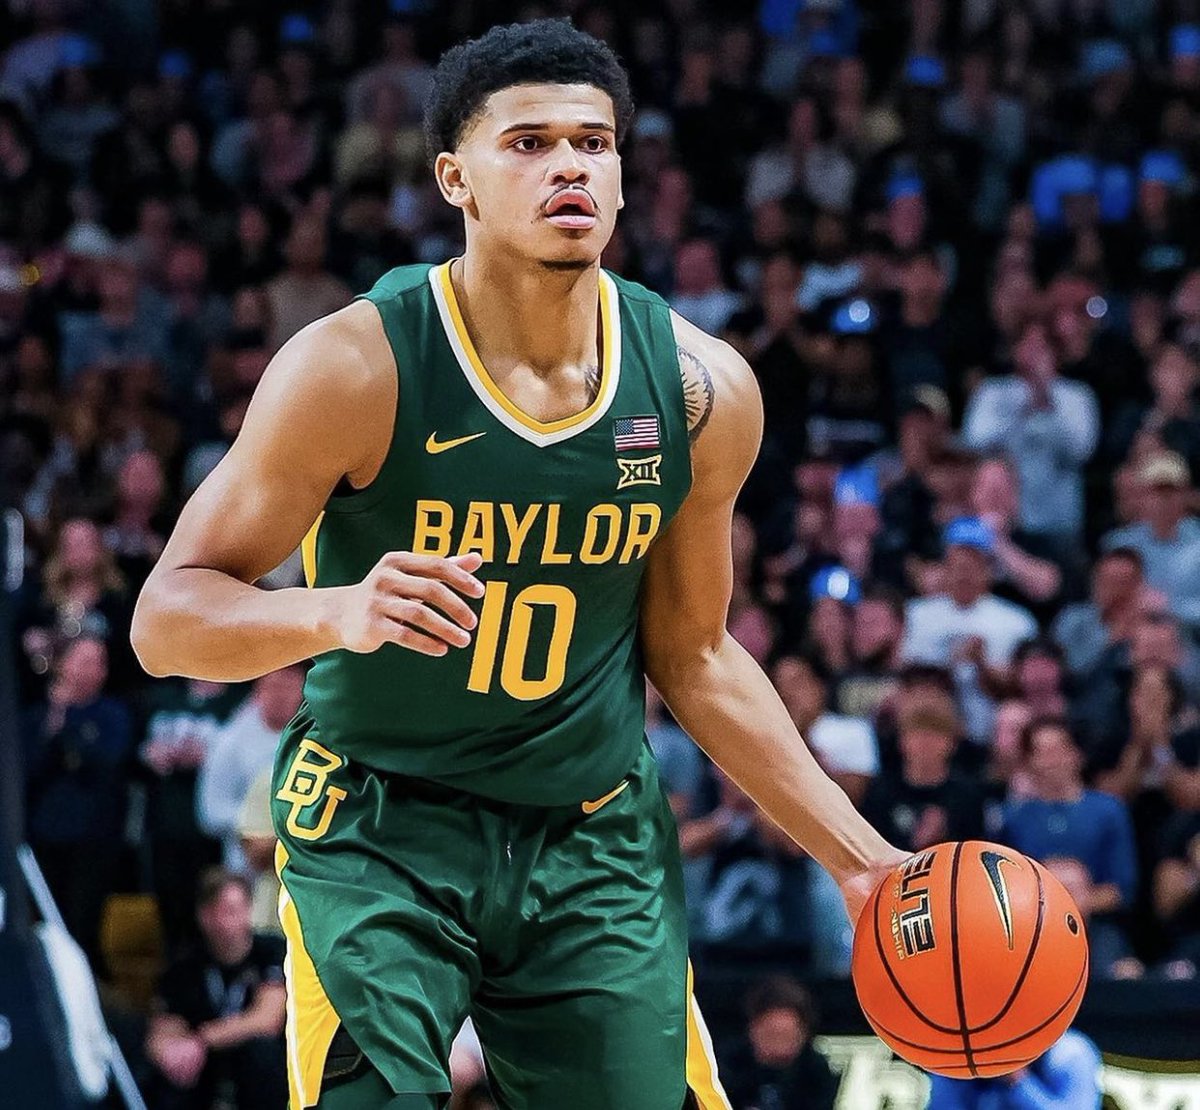 RayJ Dennis in Baylor’s W: 21 points 5 assists 4 rebounds 4 steals 56% FG% One of the best guards in the nation. Deserves so much more respect #SicEm